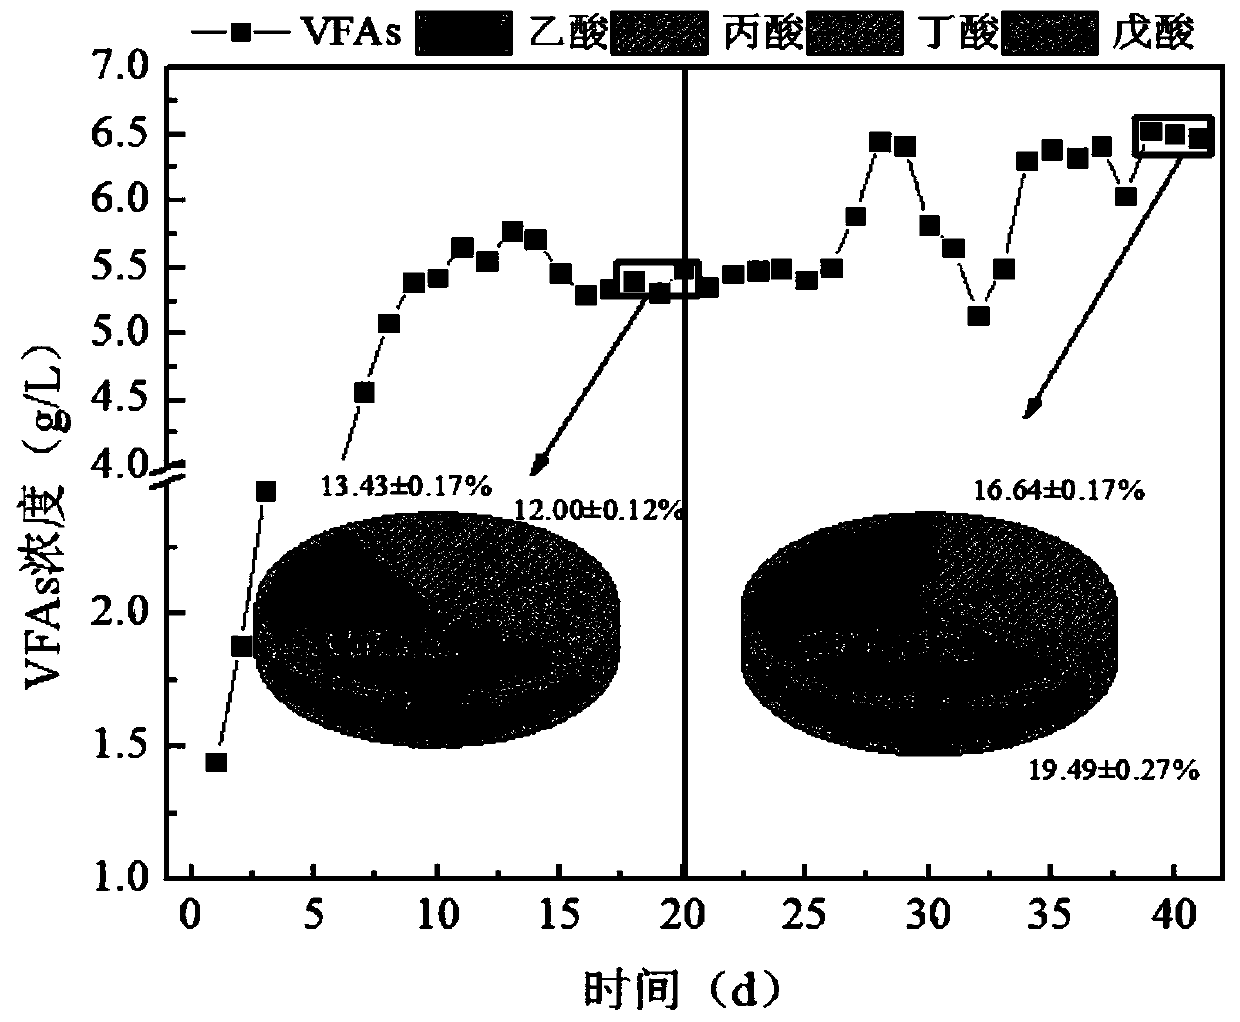 A method for excess sludge treatment and resource recovery and a method for improving the yield of vfas